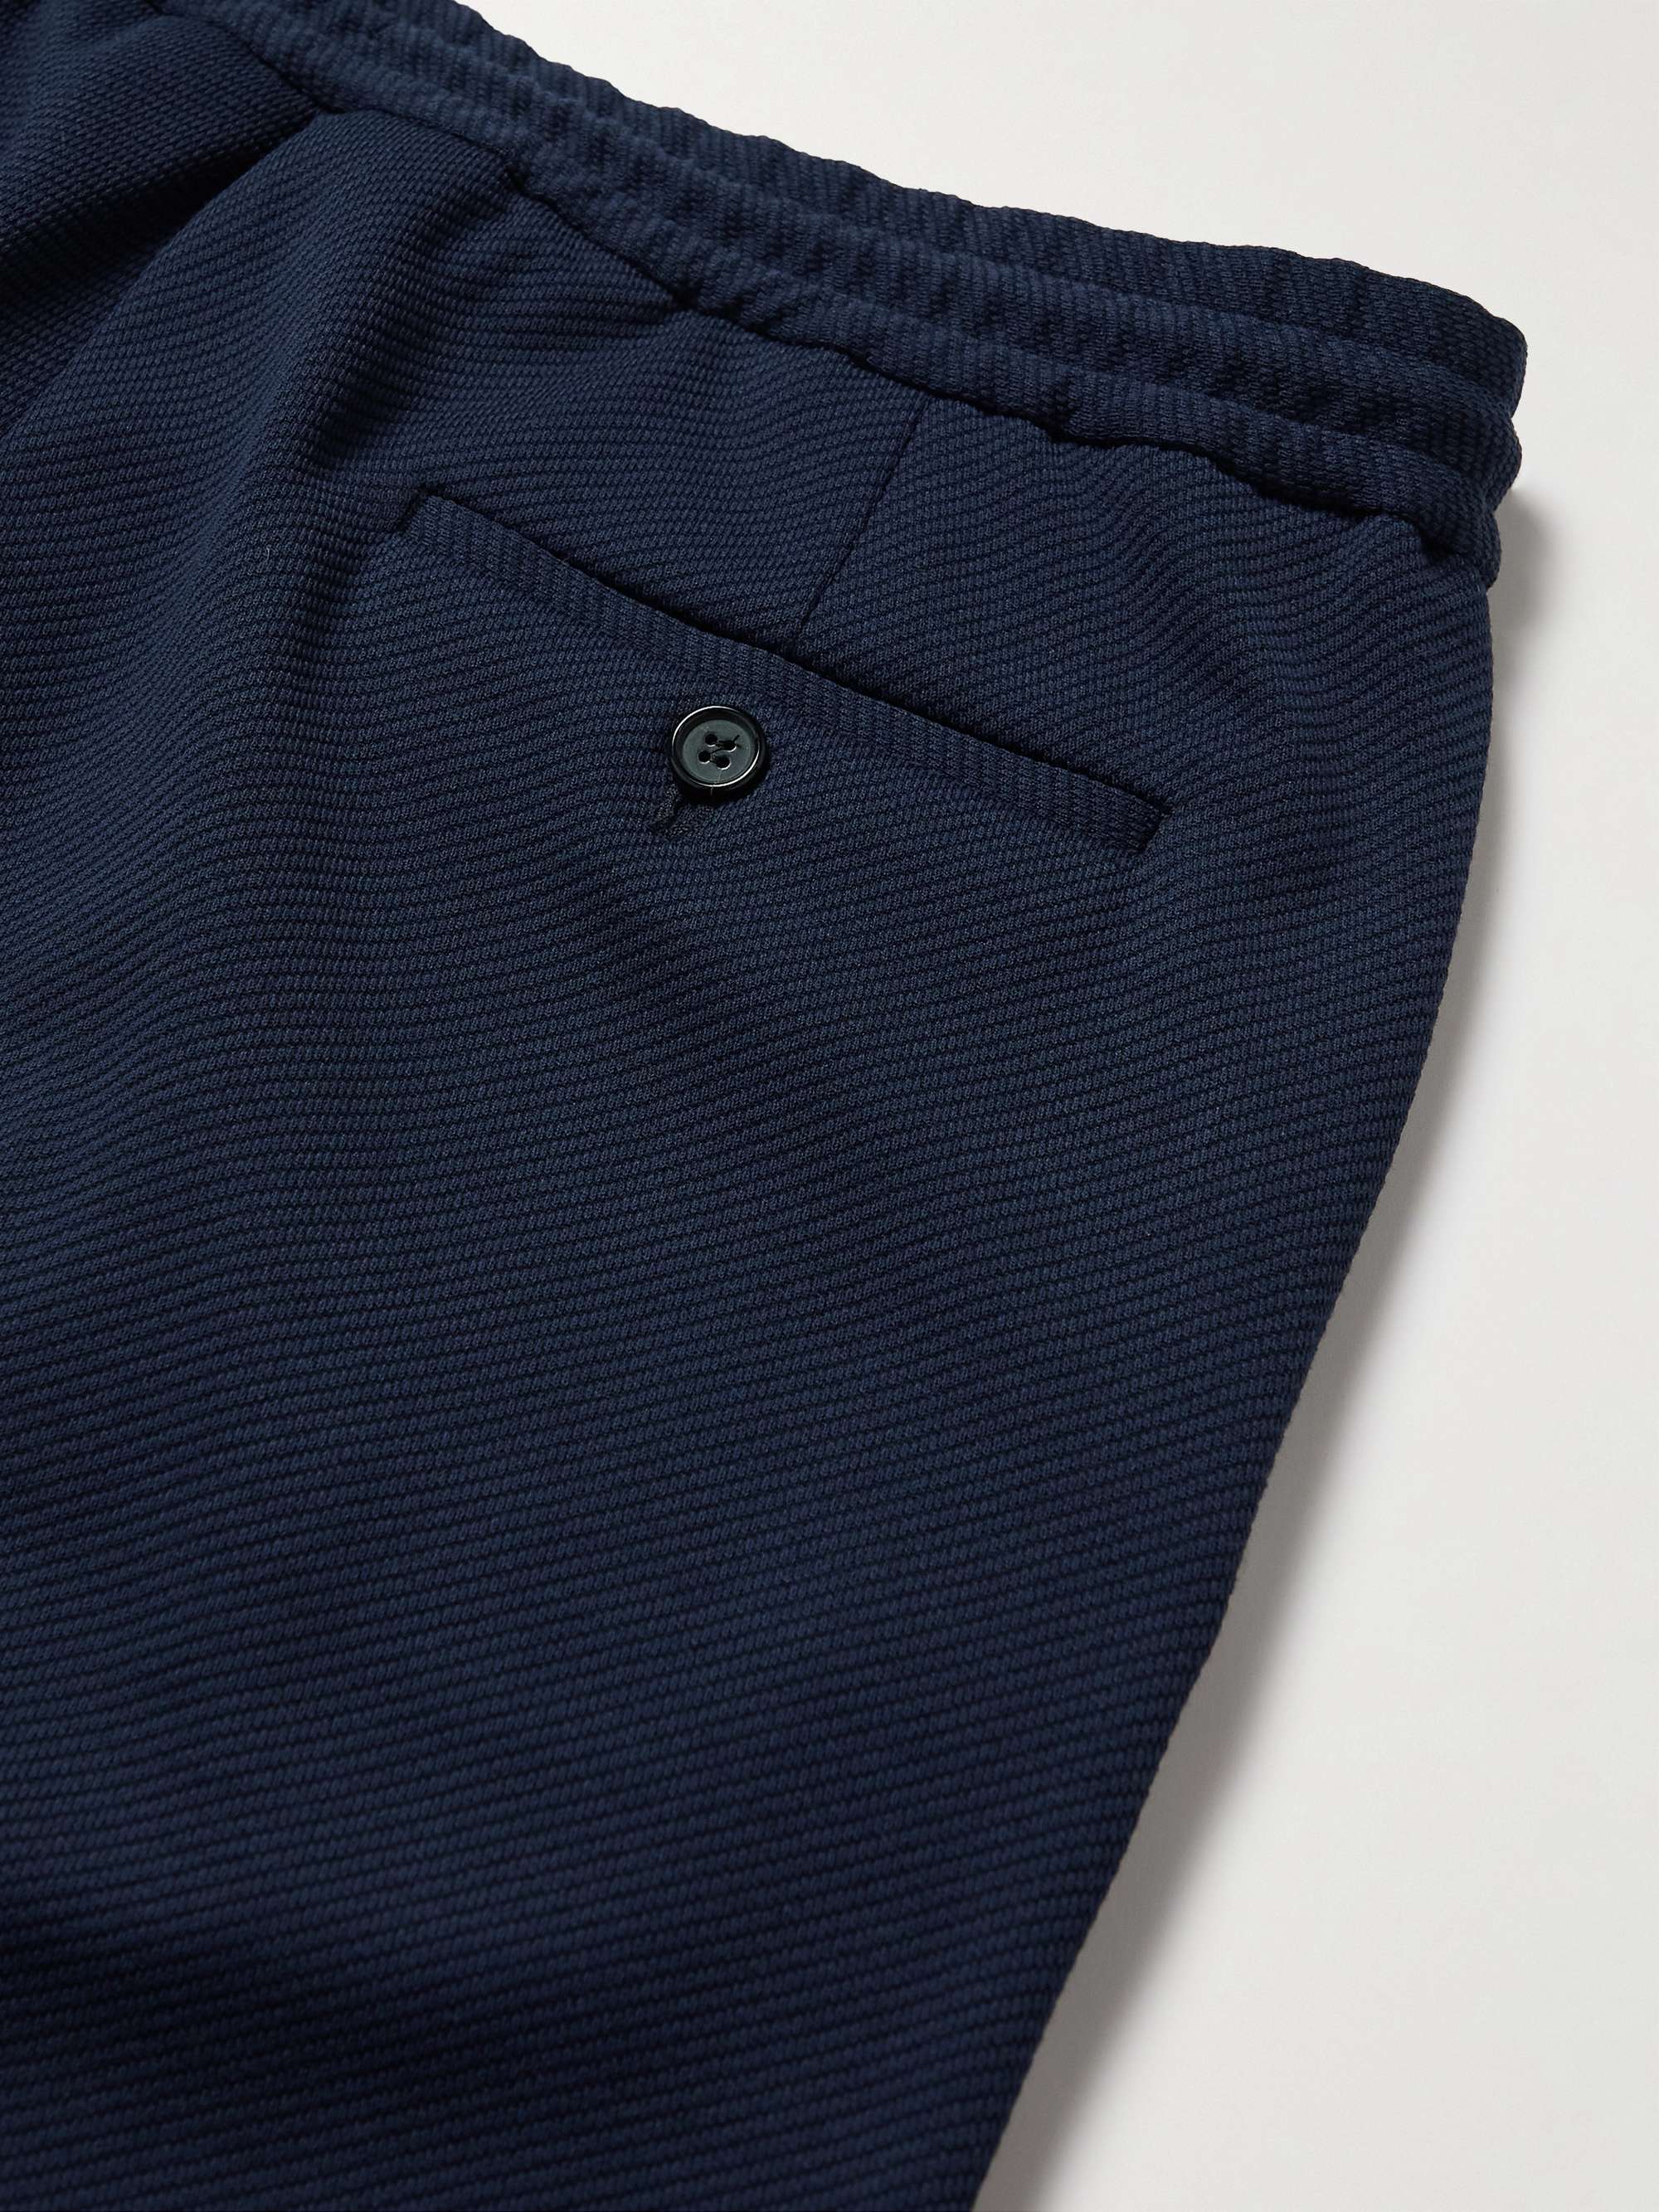 PAUL SMITH Gents Straight-Leg Woven Drawstring Trousers